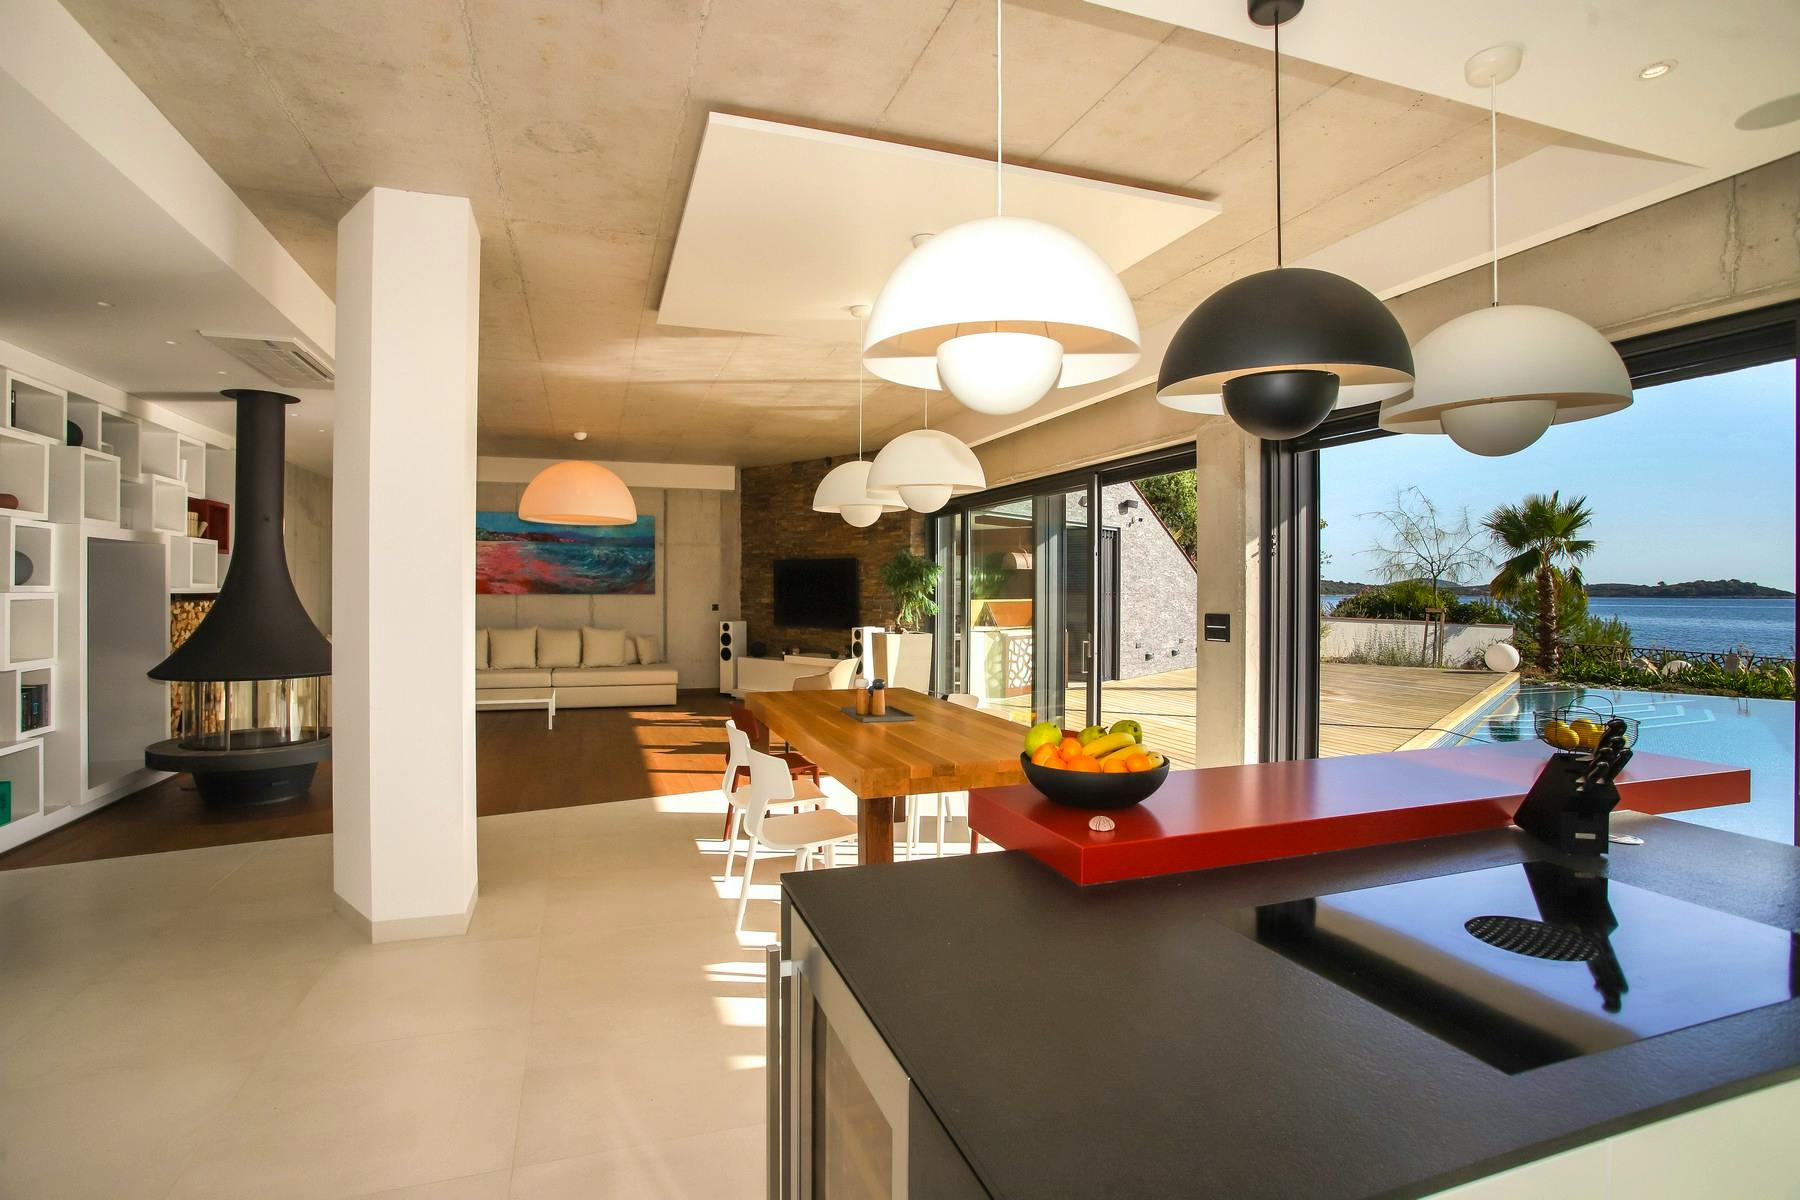 Kitchen, dining room, and living room with spectacular sea view